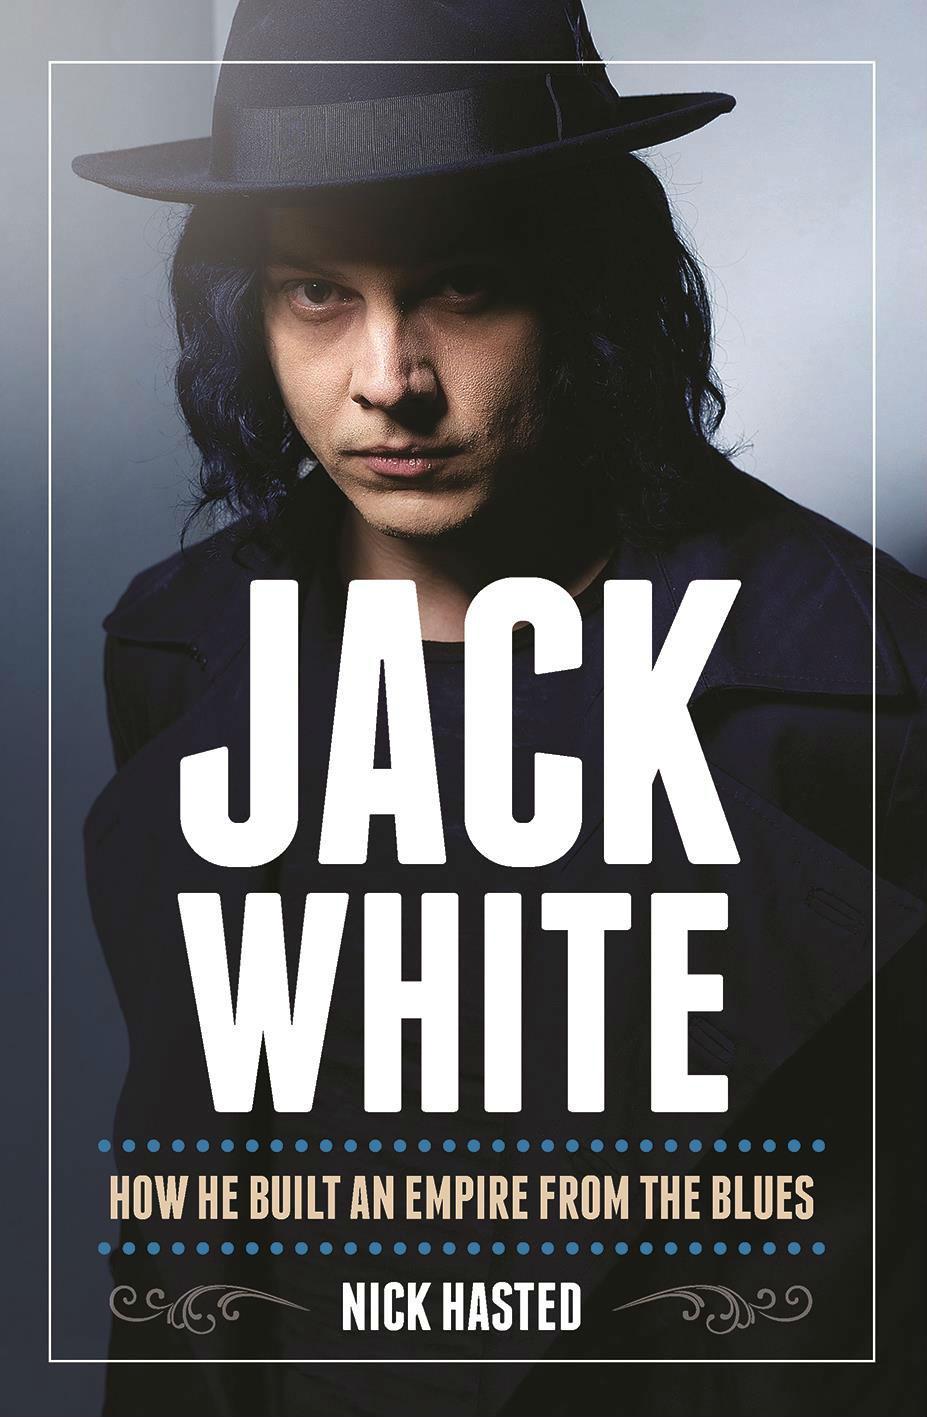 The new Jack White biography captures the early fascination with the idiosyncratic rock star